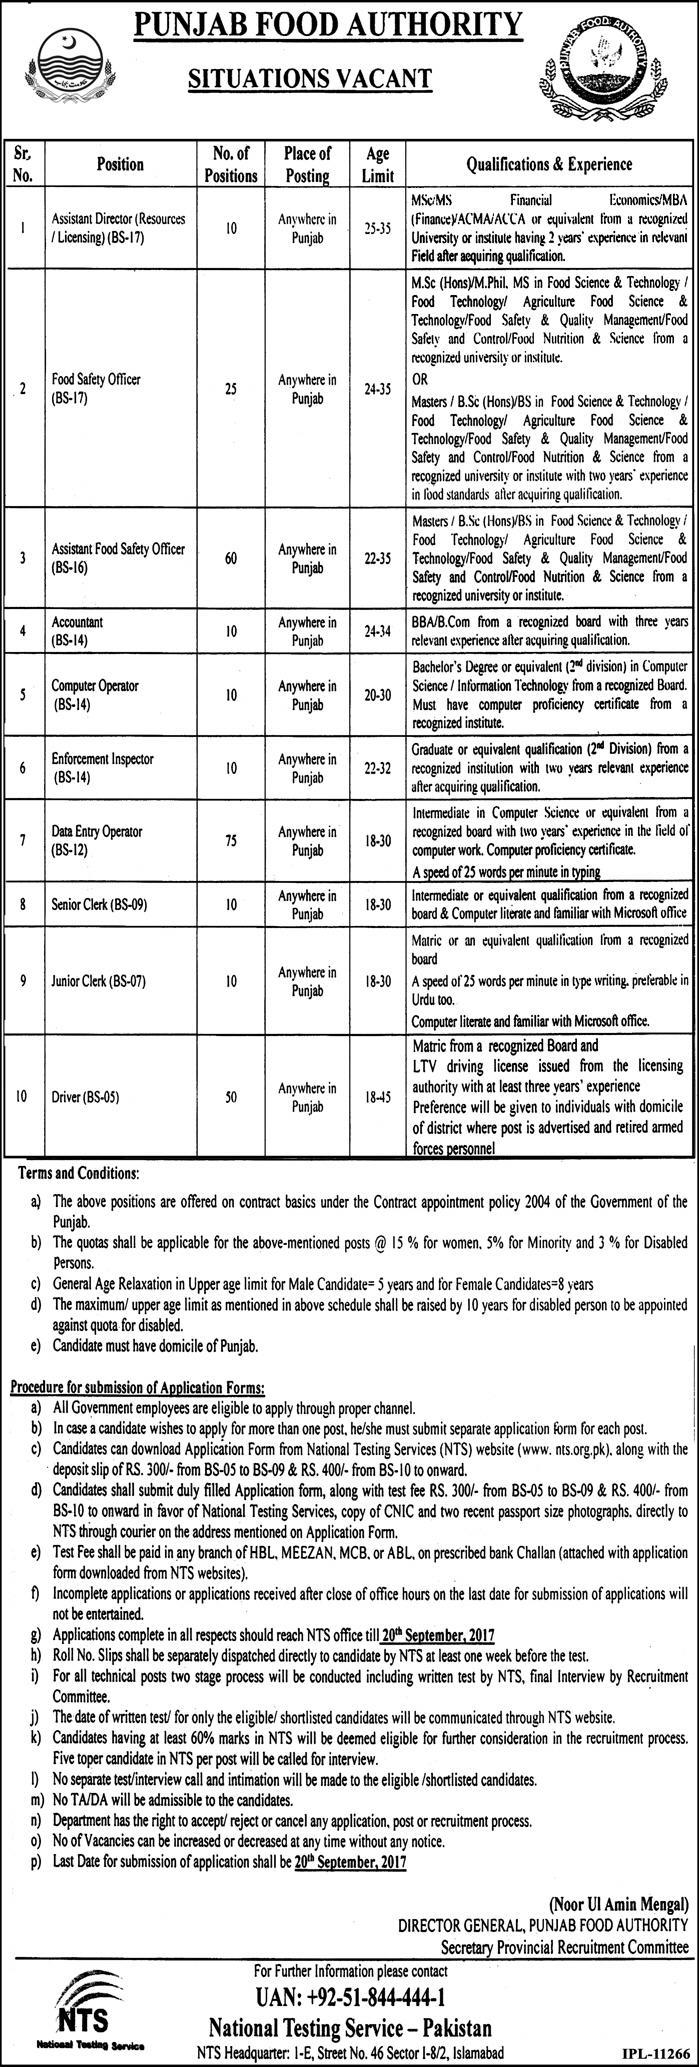 Food Safety Officers, DEO, Drivers jobs in  Punjab-Food-Authority